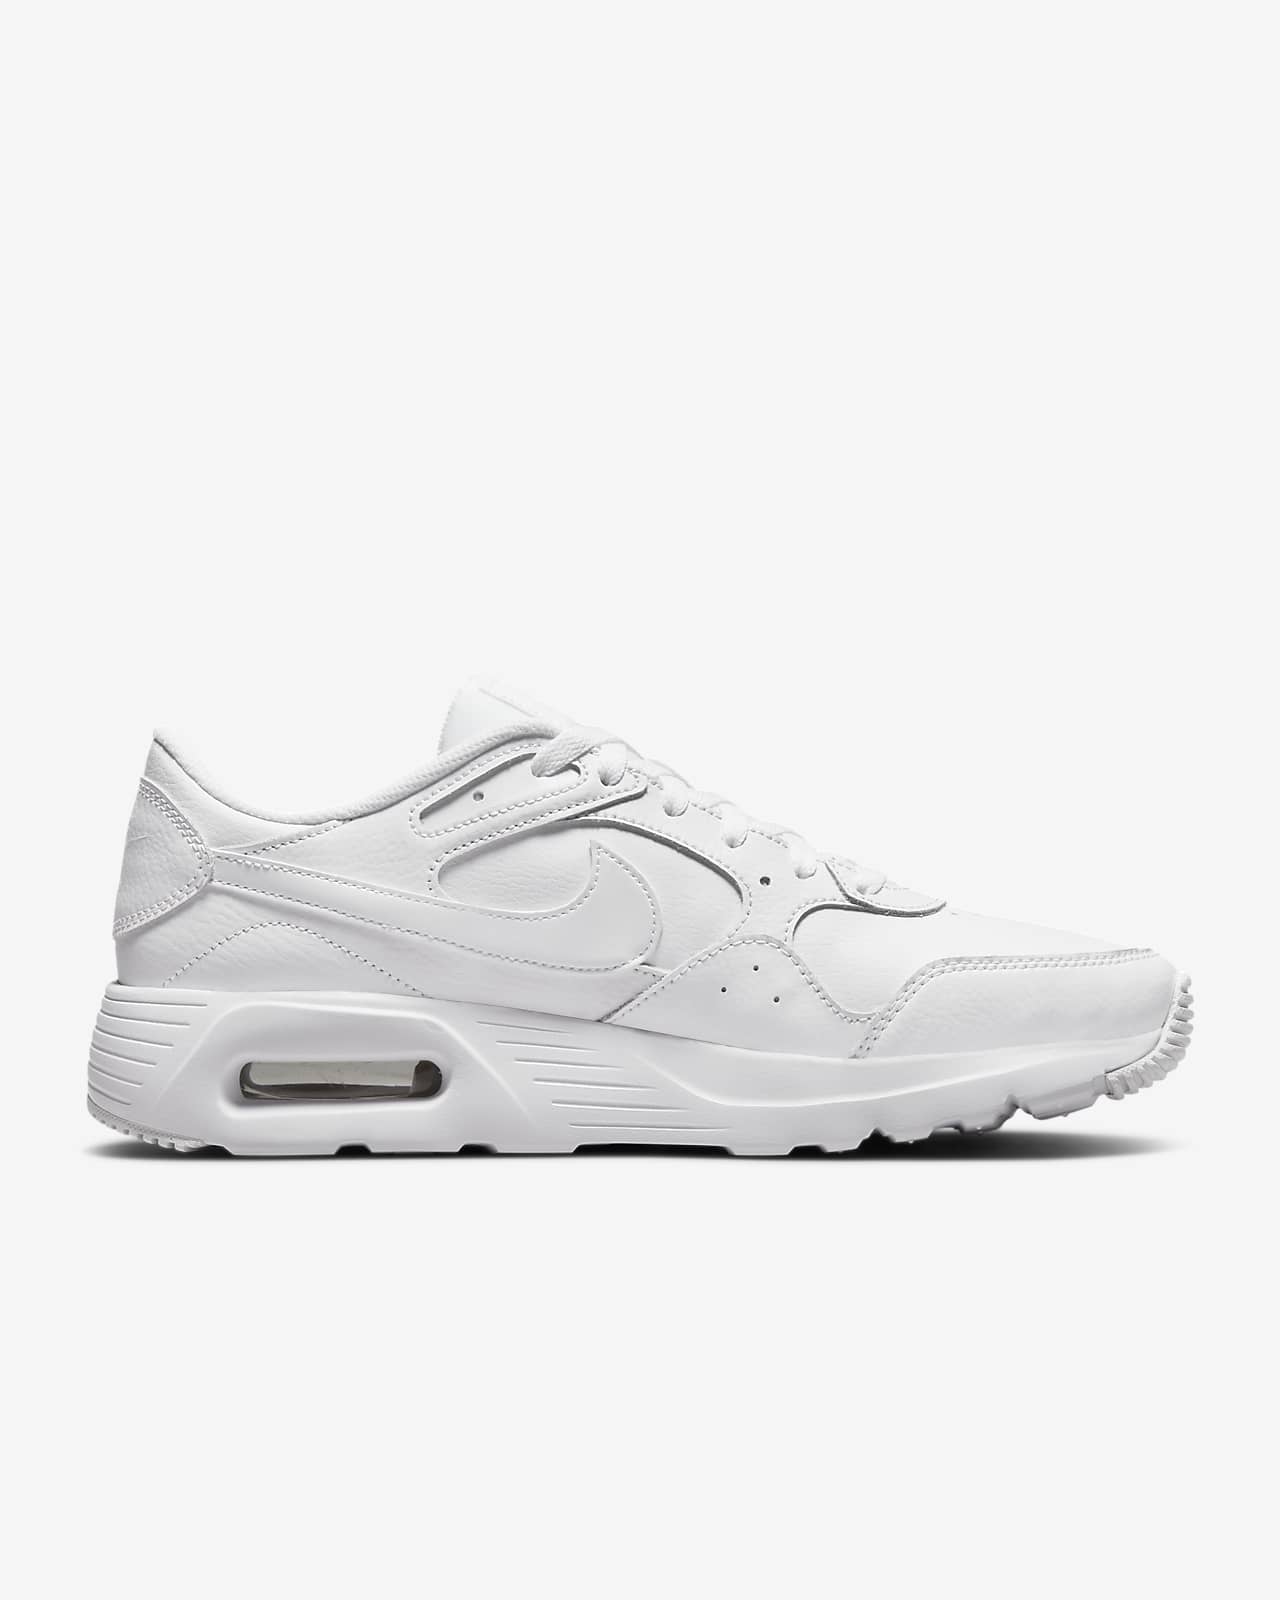 Nike Air Max SC Leather Men\'s Shoes. Nike ID